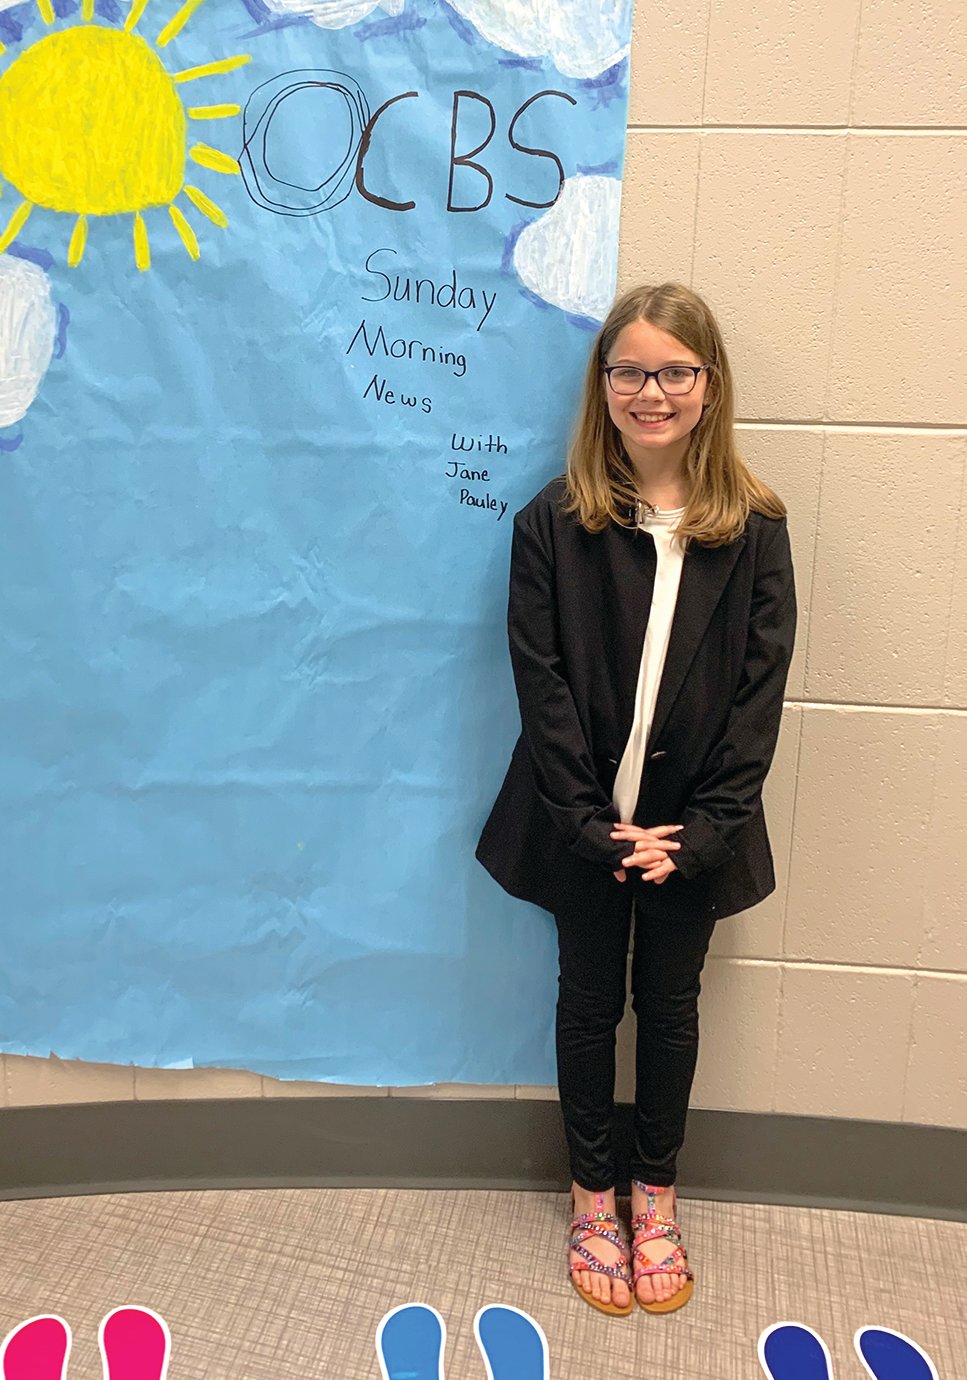 Fourth-grade Pleasant Hill student Savanah Ratcliff shows off her best impression of a wax figure of Sunday Morning News anchor Jane Pauley at the school Friday. Several fourth graders at Pleasant Hill researched and presented themselves as wax figures for the school